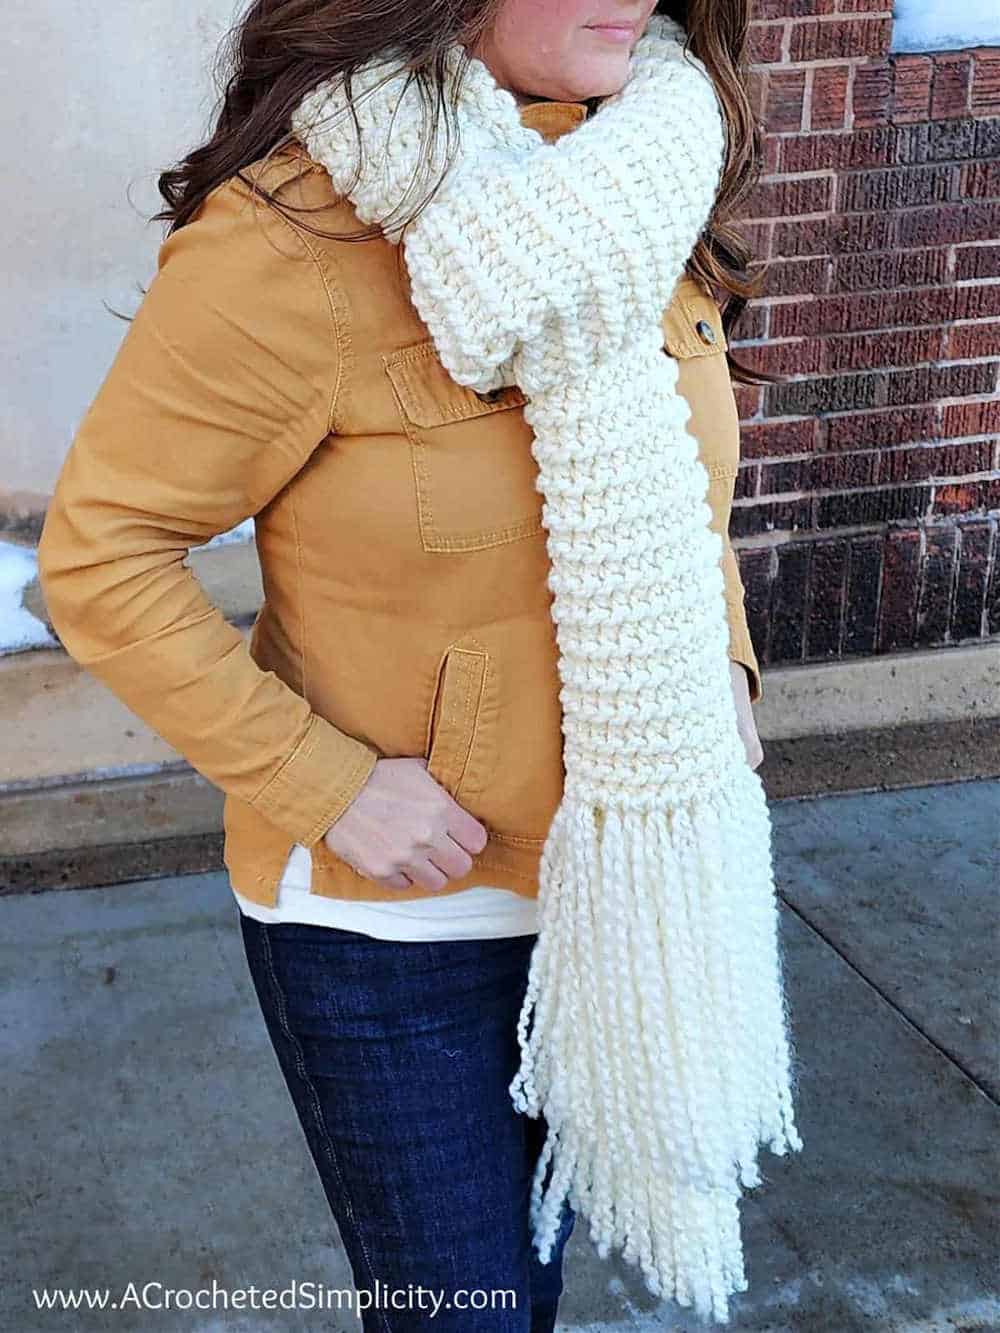 Model wearing a white crocheted scarf.